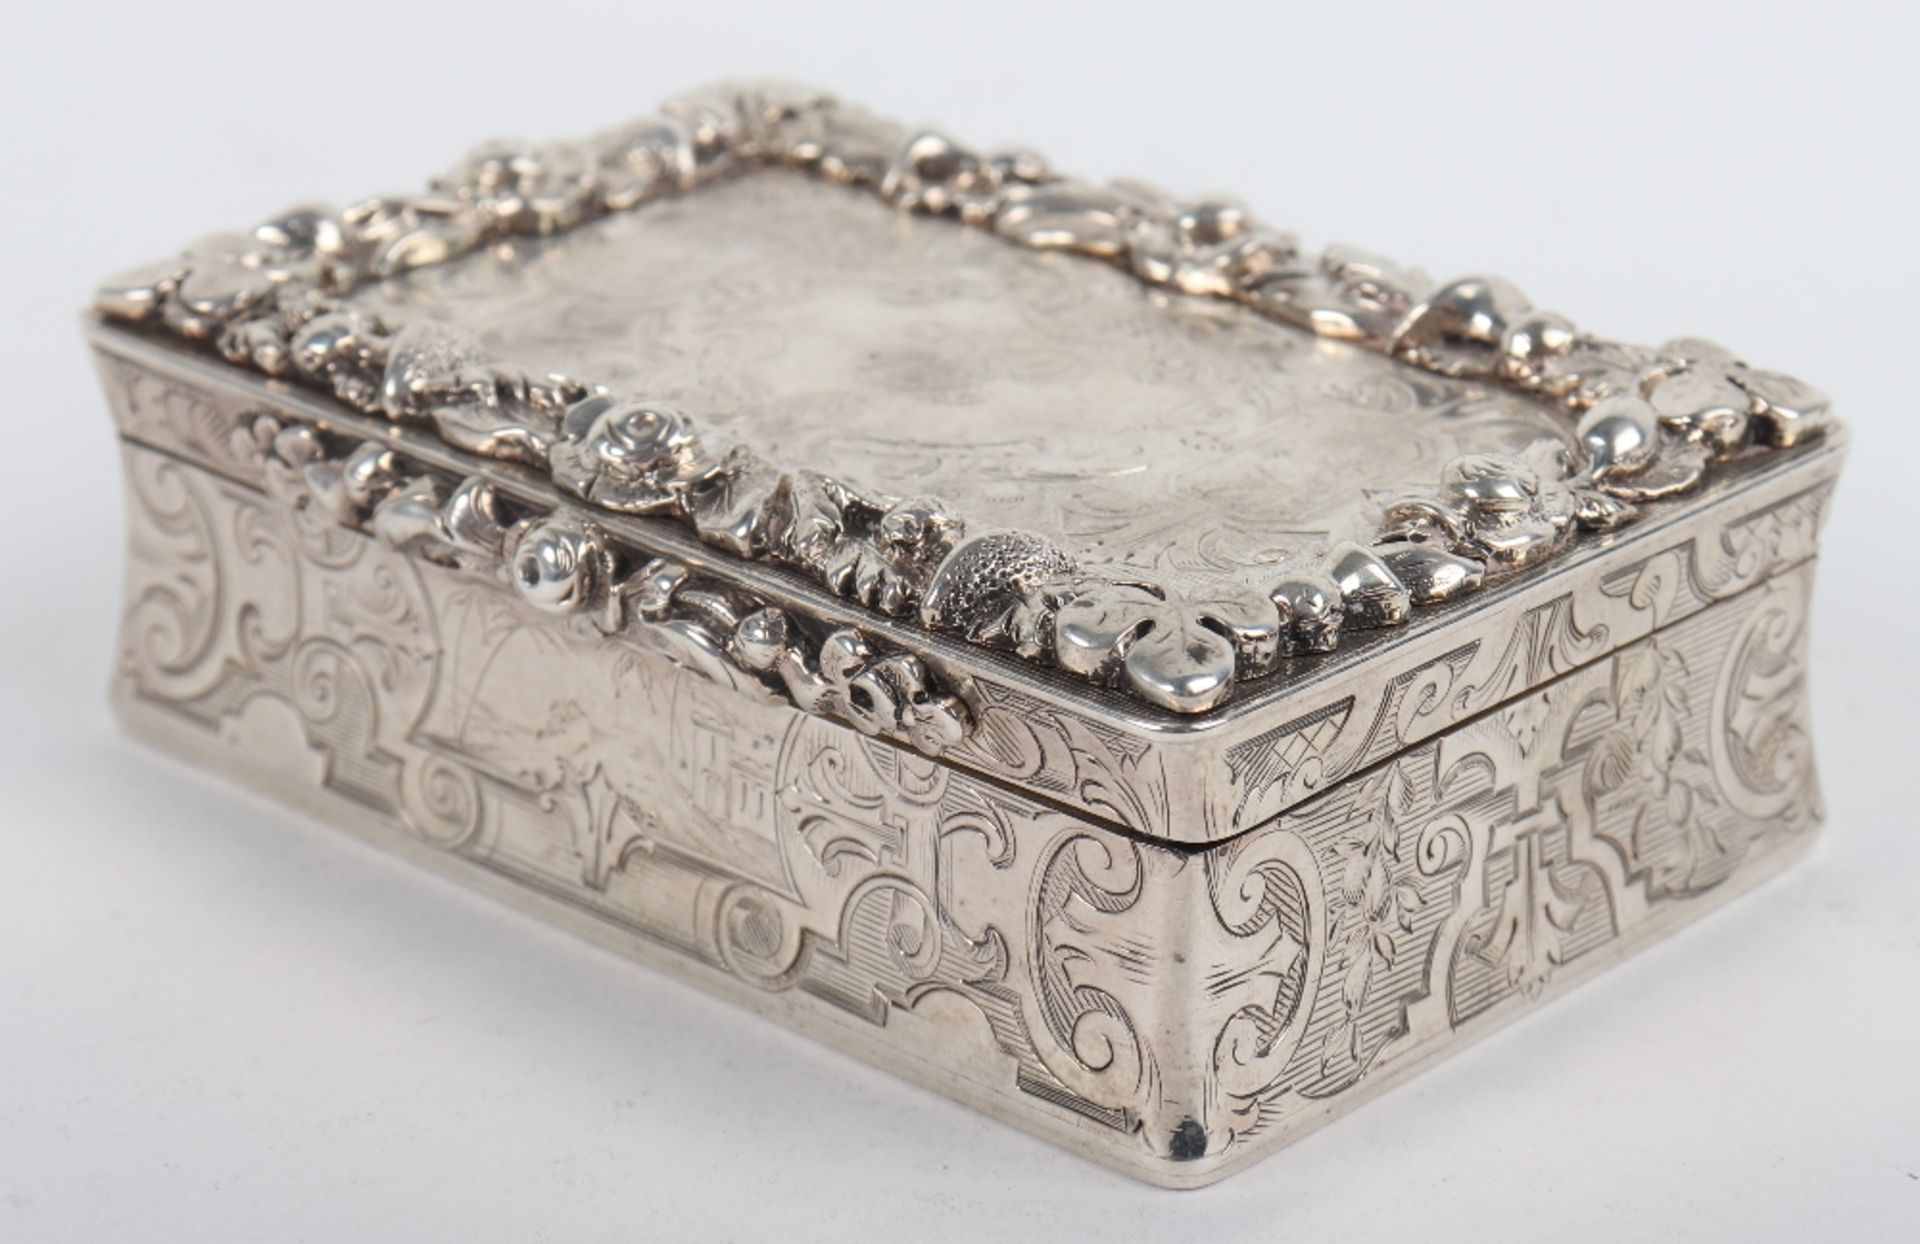 A Victorian heavy silver snuff box, Charles Rawlings & William Summers, London 1845 - Image 4 of 9